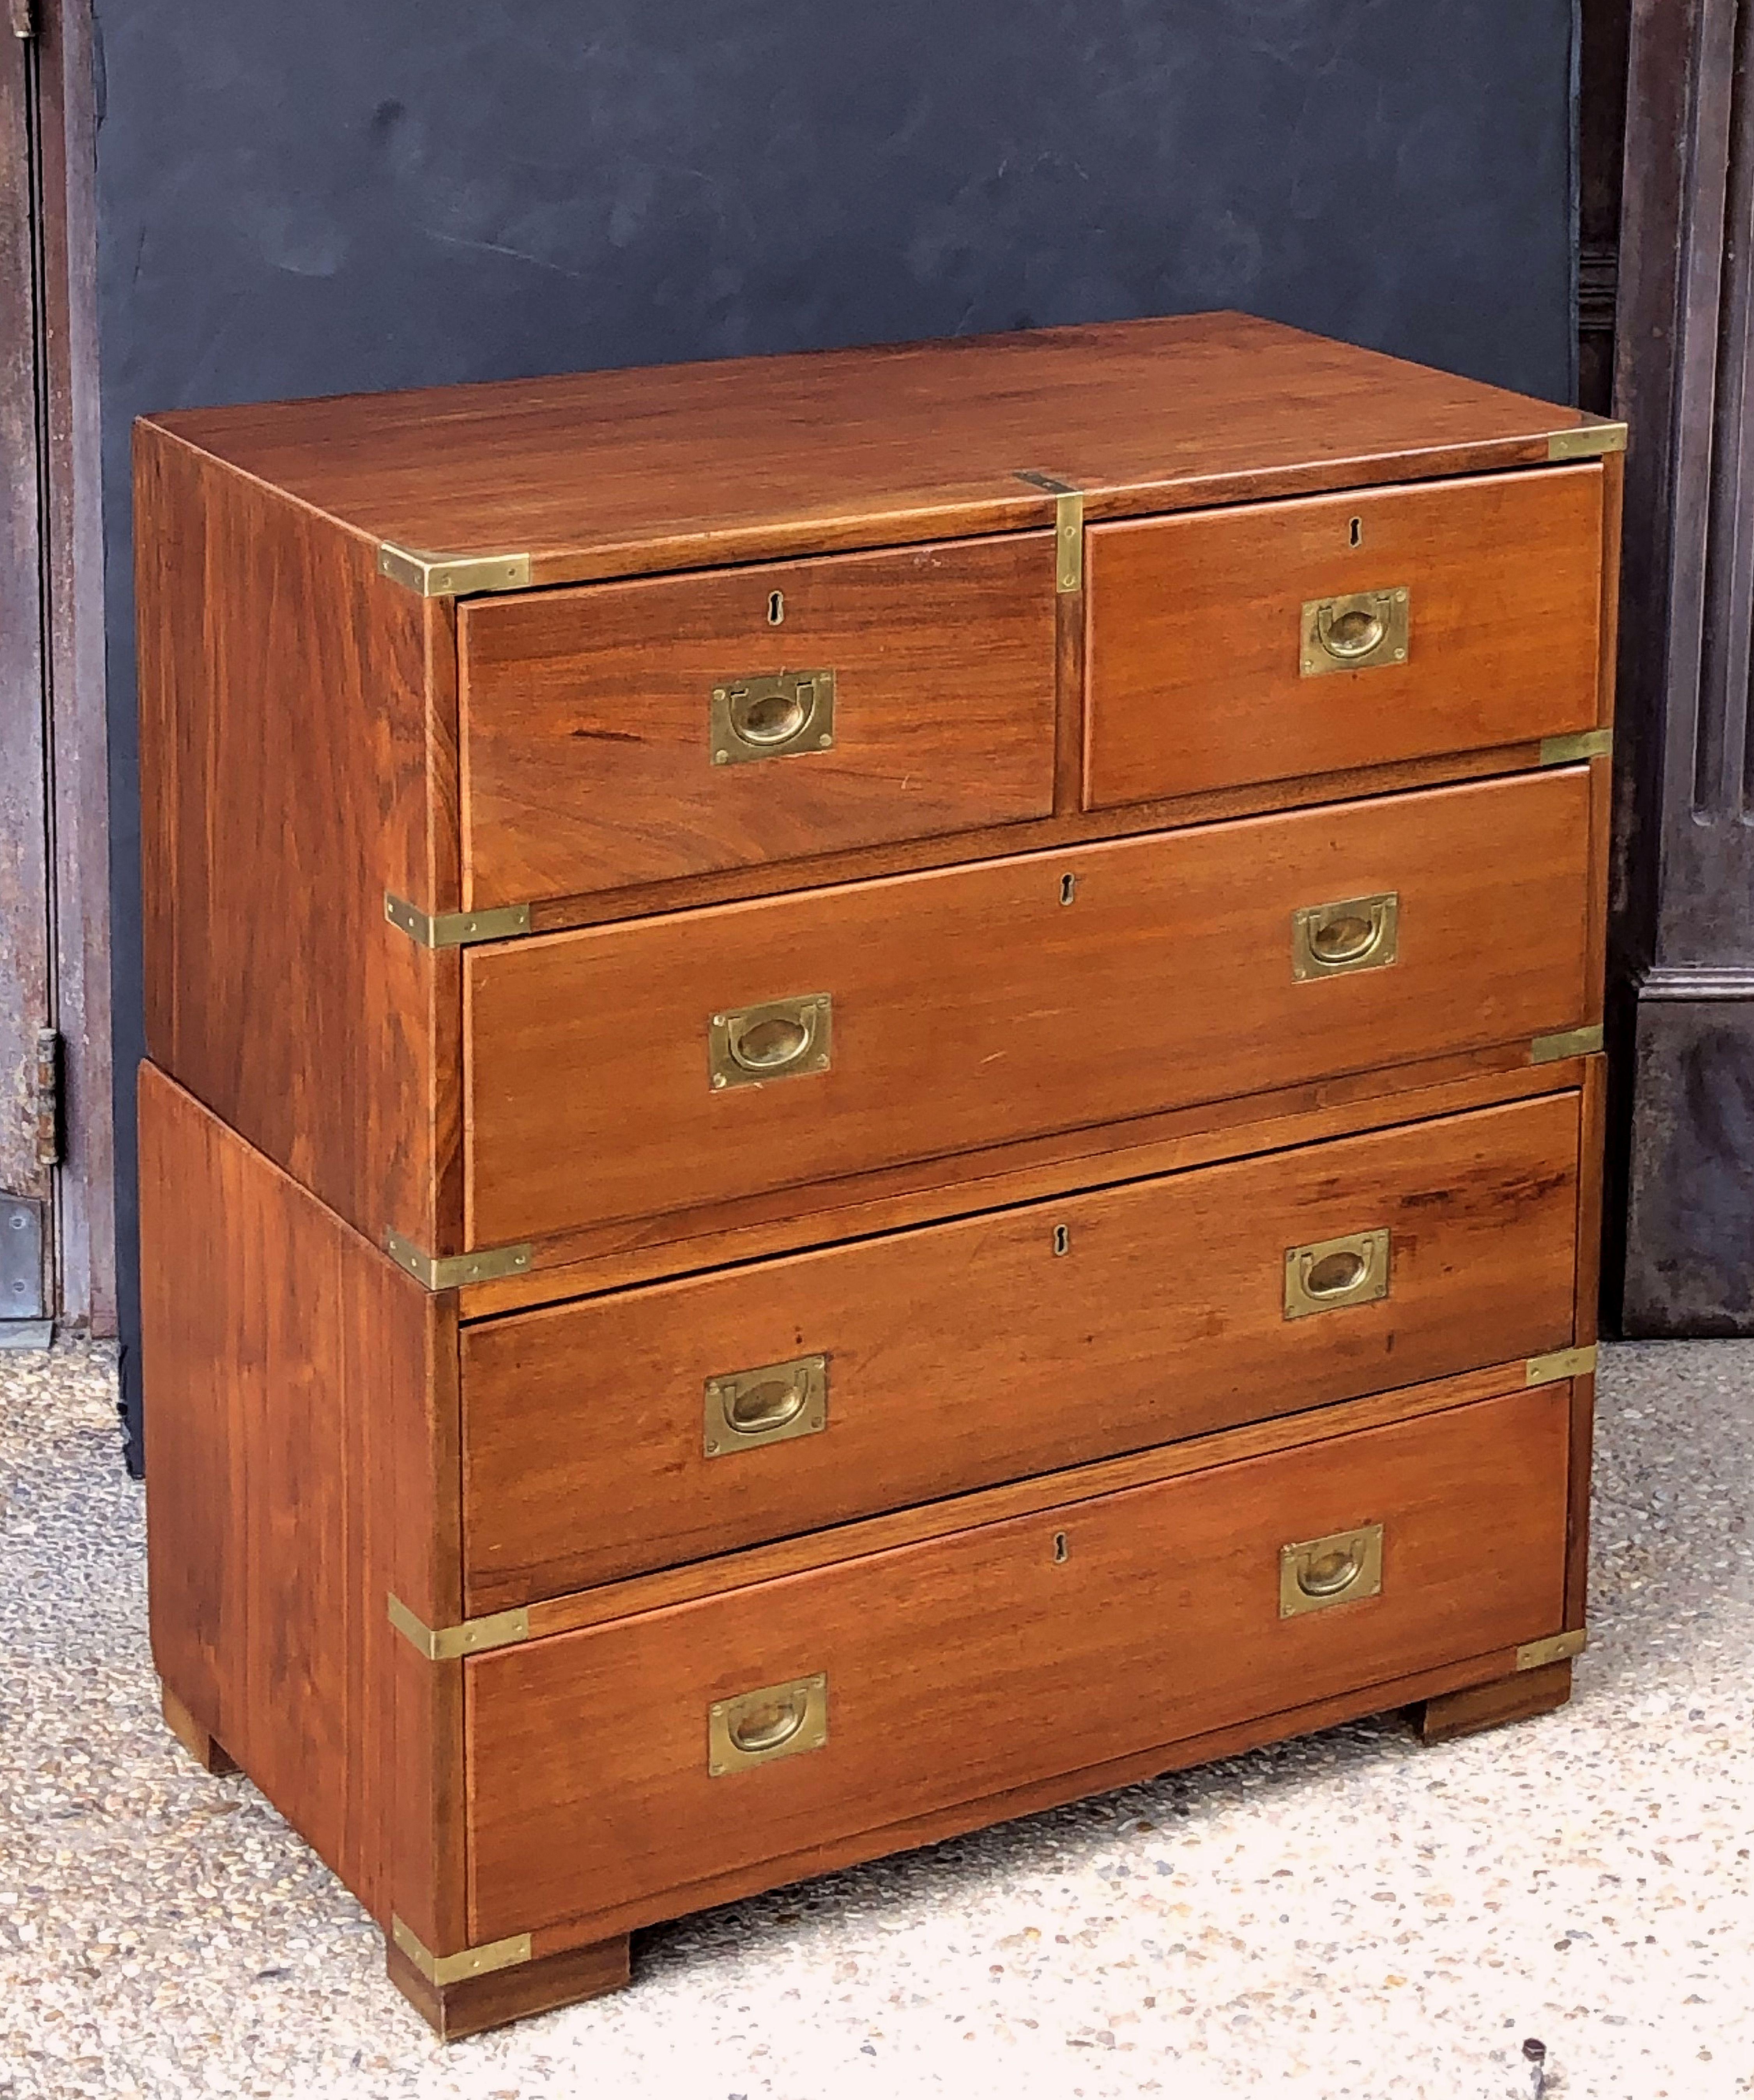 19th Century British Military Officer's Campaign Chest of Brass-Bound Oak and Mahogany